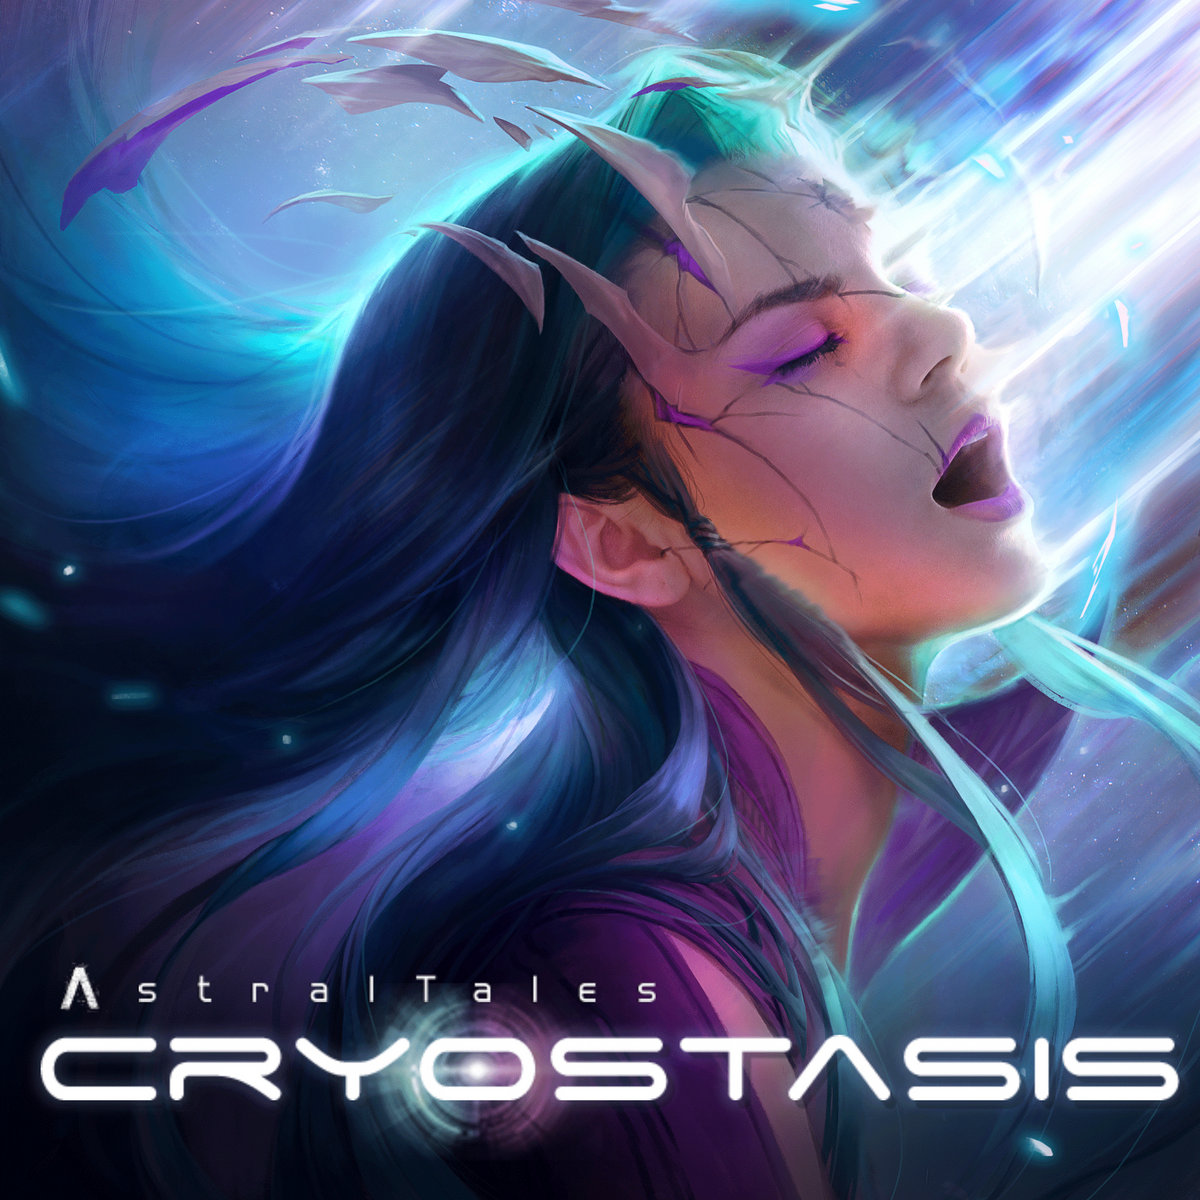 a1907822873 10 - Astral Tales reaches frozen bliss in ‘Cryostasis’